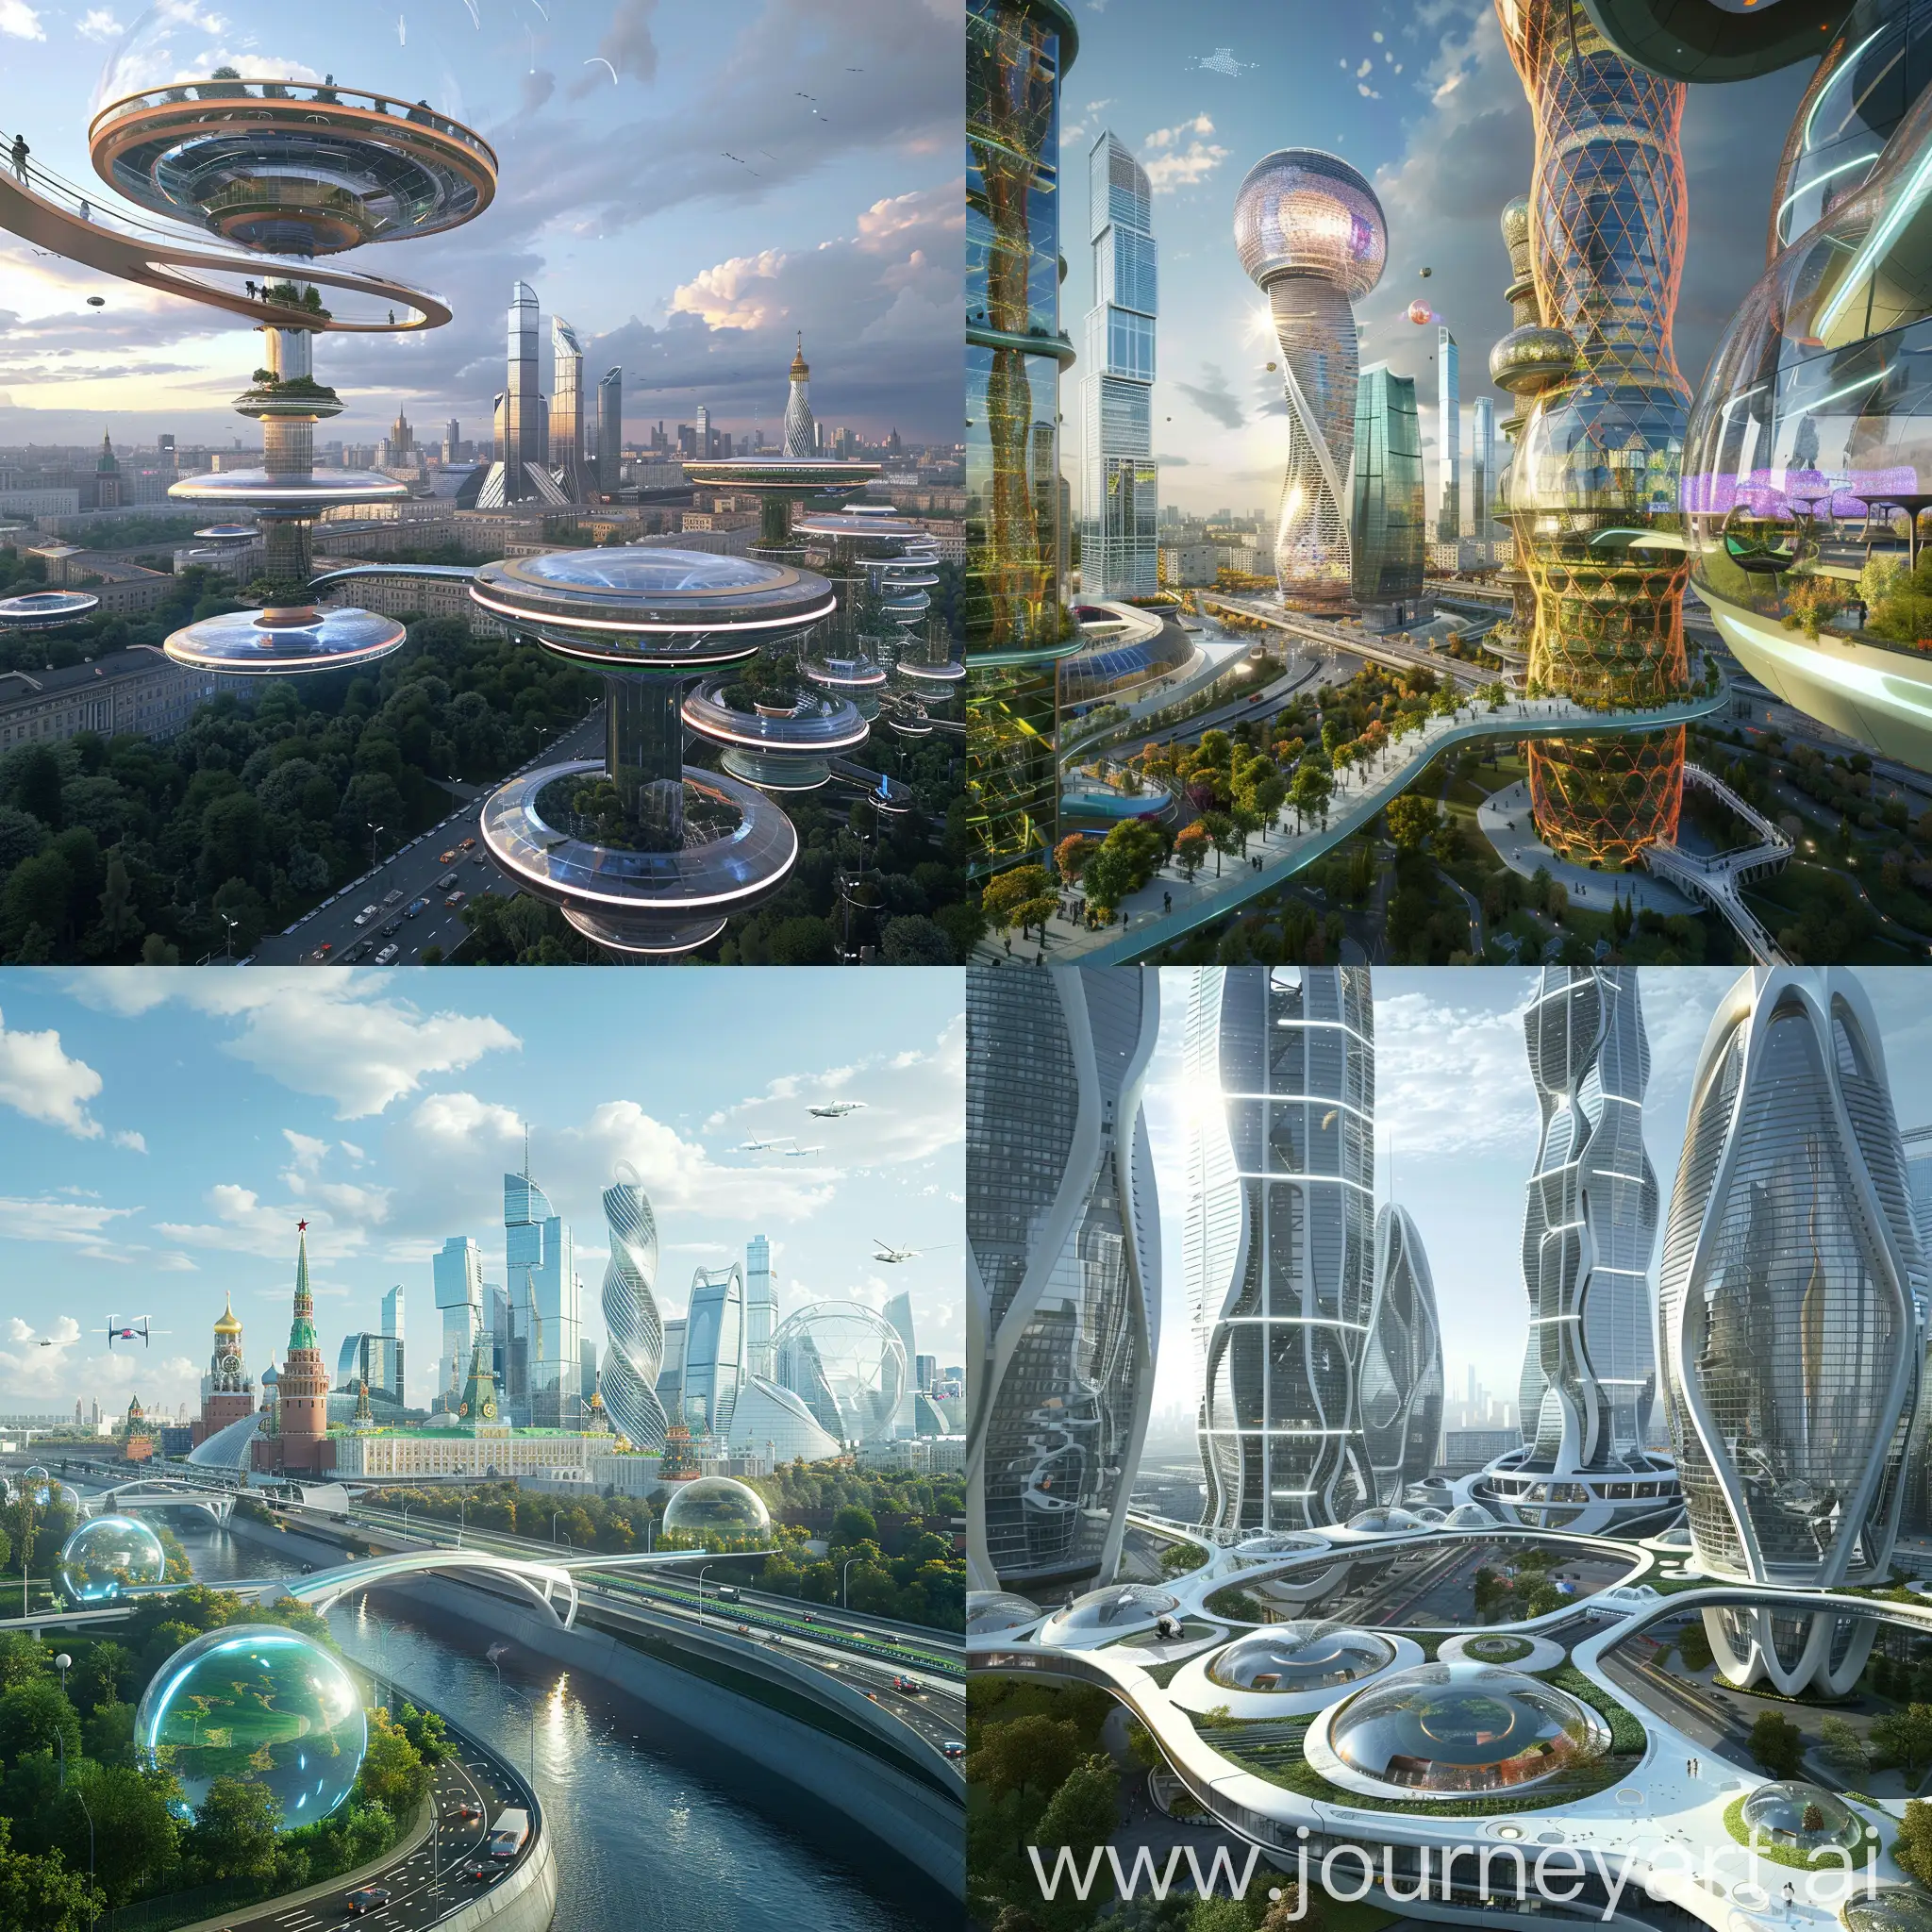 Futuristic Moscow, Integrated IoT Systems, Smart Grids, Augmented Reality Navigation, Autonomous Public Transport, Vertical Gardens, Digital Public Services, E-Health Platforms, 3D Printed Architecture, Social Web Hubs, Cybersecurity Nodes, Interactive Facades, Drone Delivery Networks, Smart Lighting, Public Wi-Fi Trees, Holographic Signage, Urban Mobility Hubs, Responsive Public Art, Green Corridors, Solar Roadways, Weather Management Domes, futurism, in unreal engine 5 style --stylize 1000